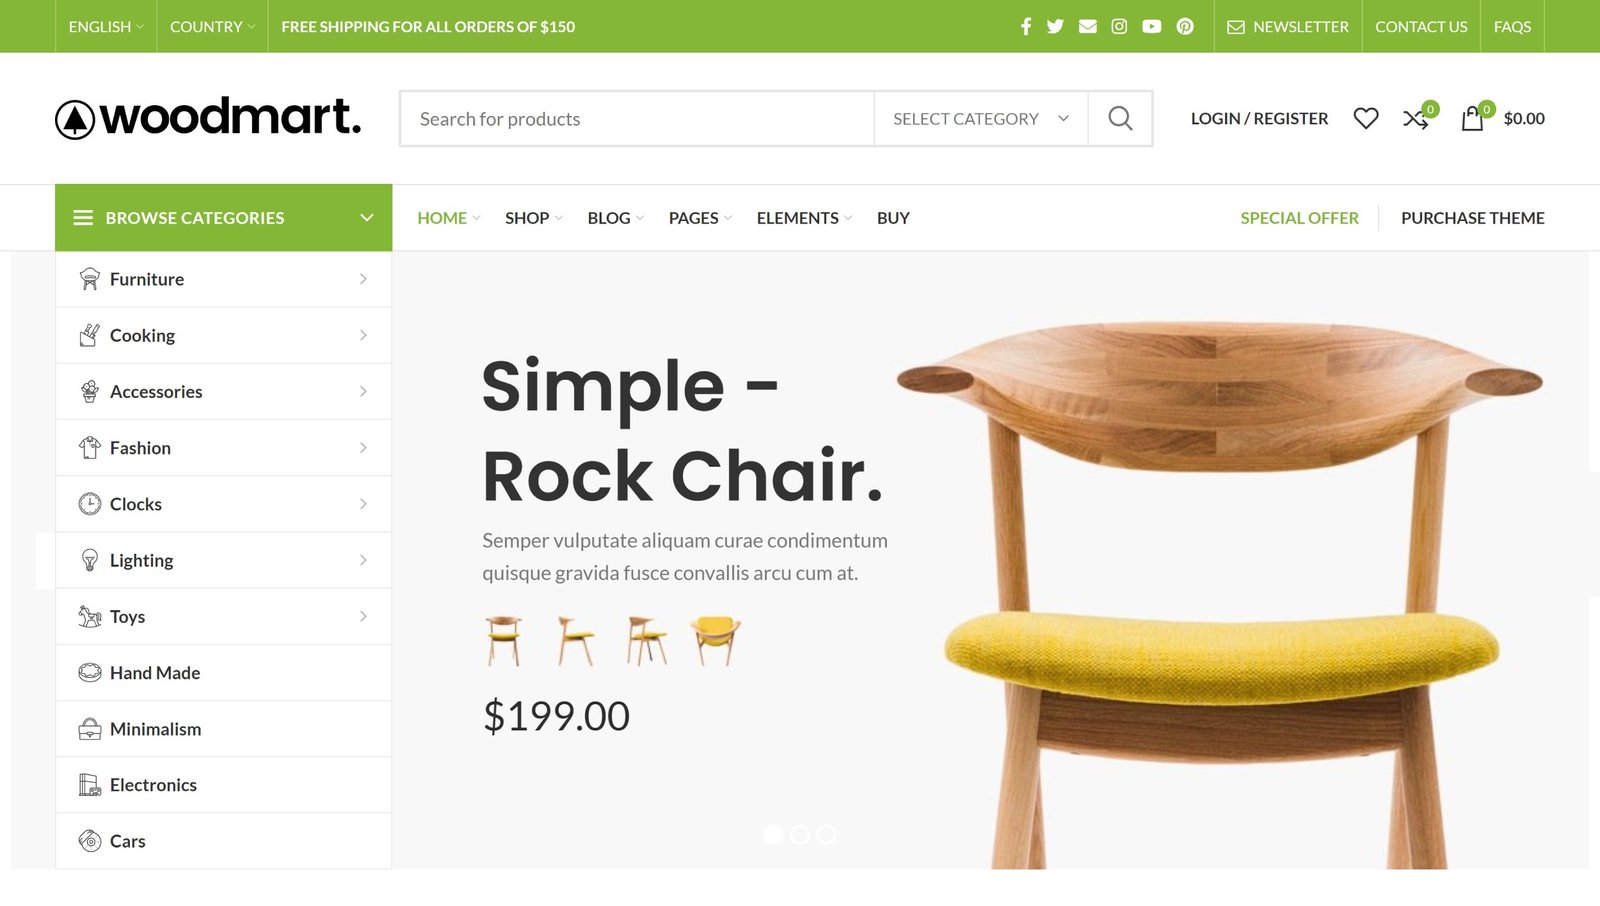 10 Best WooCommerce WordPress Themes for Online Store